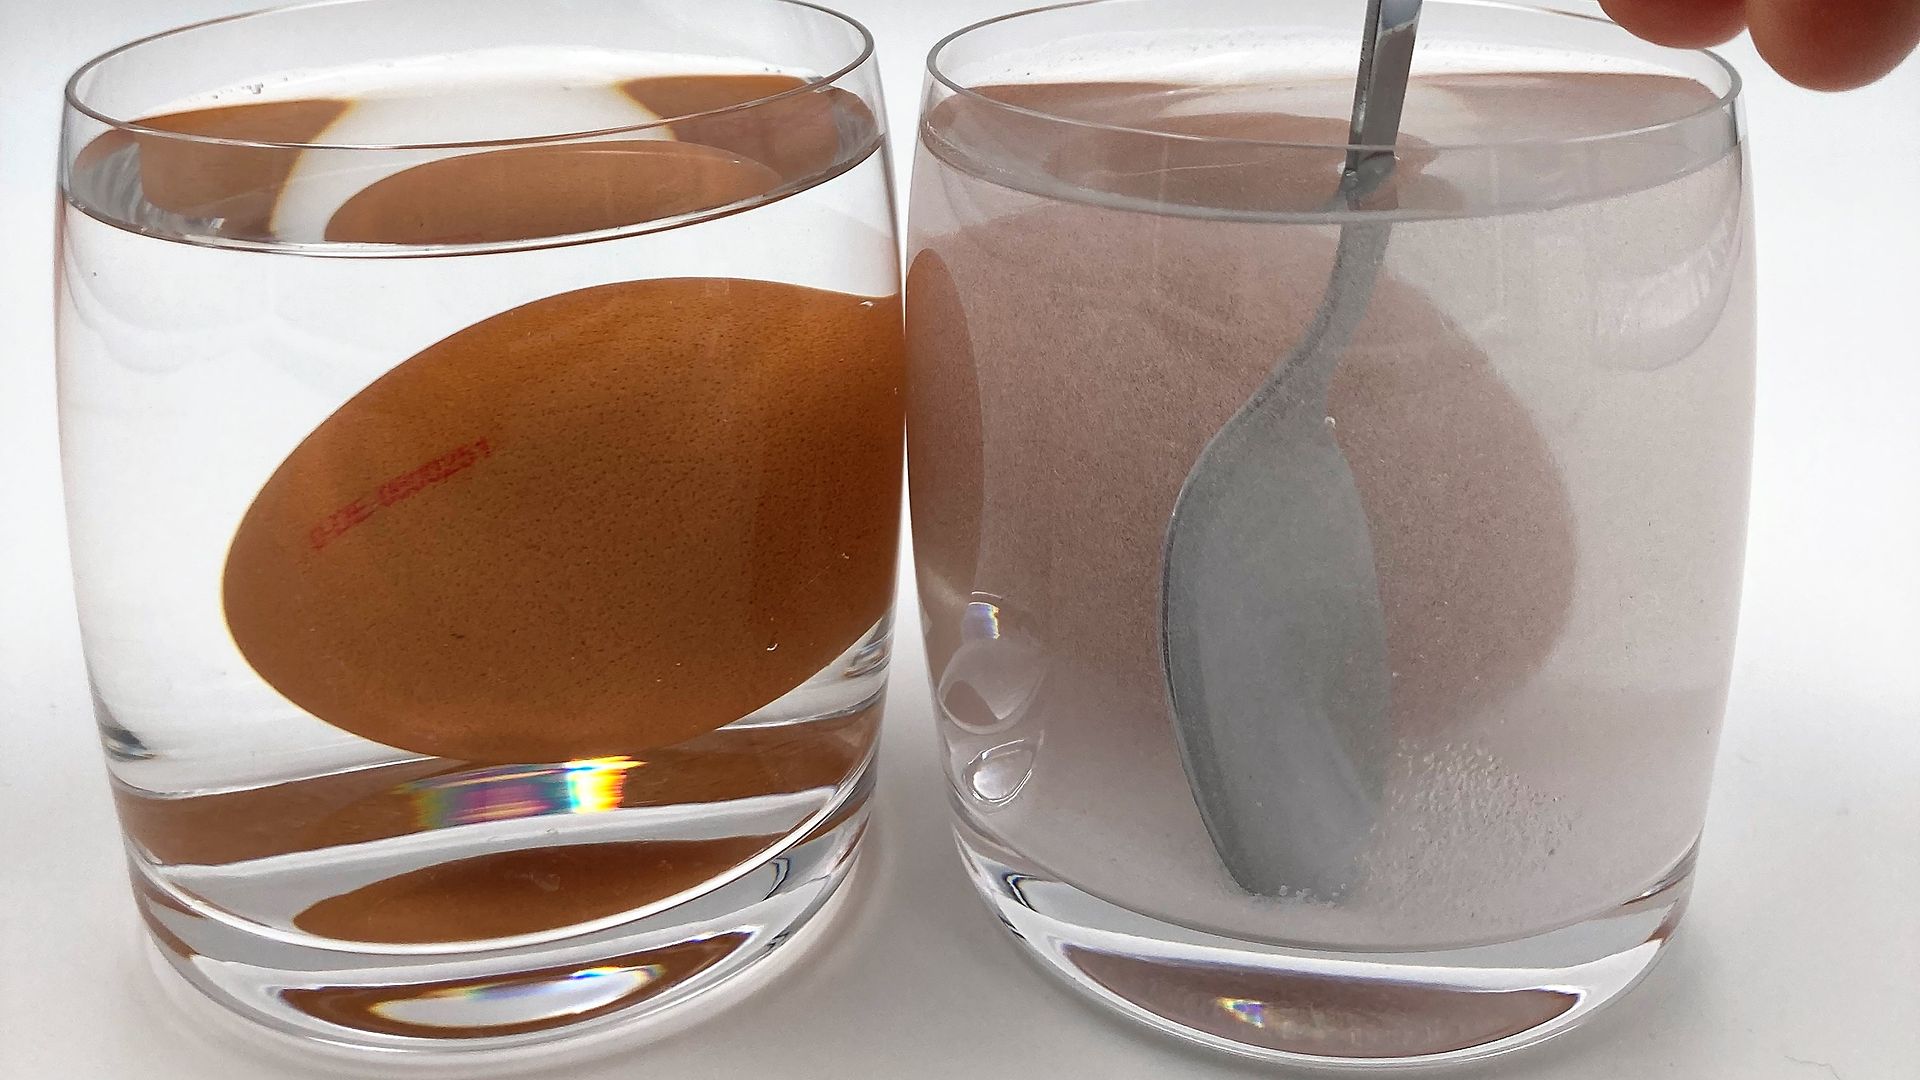 Two glasses, each filled with water and an egg. On the right side is a part of a hand stirring the salt added to the right glass with a teaspoon.